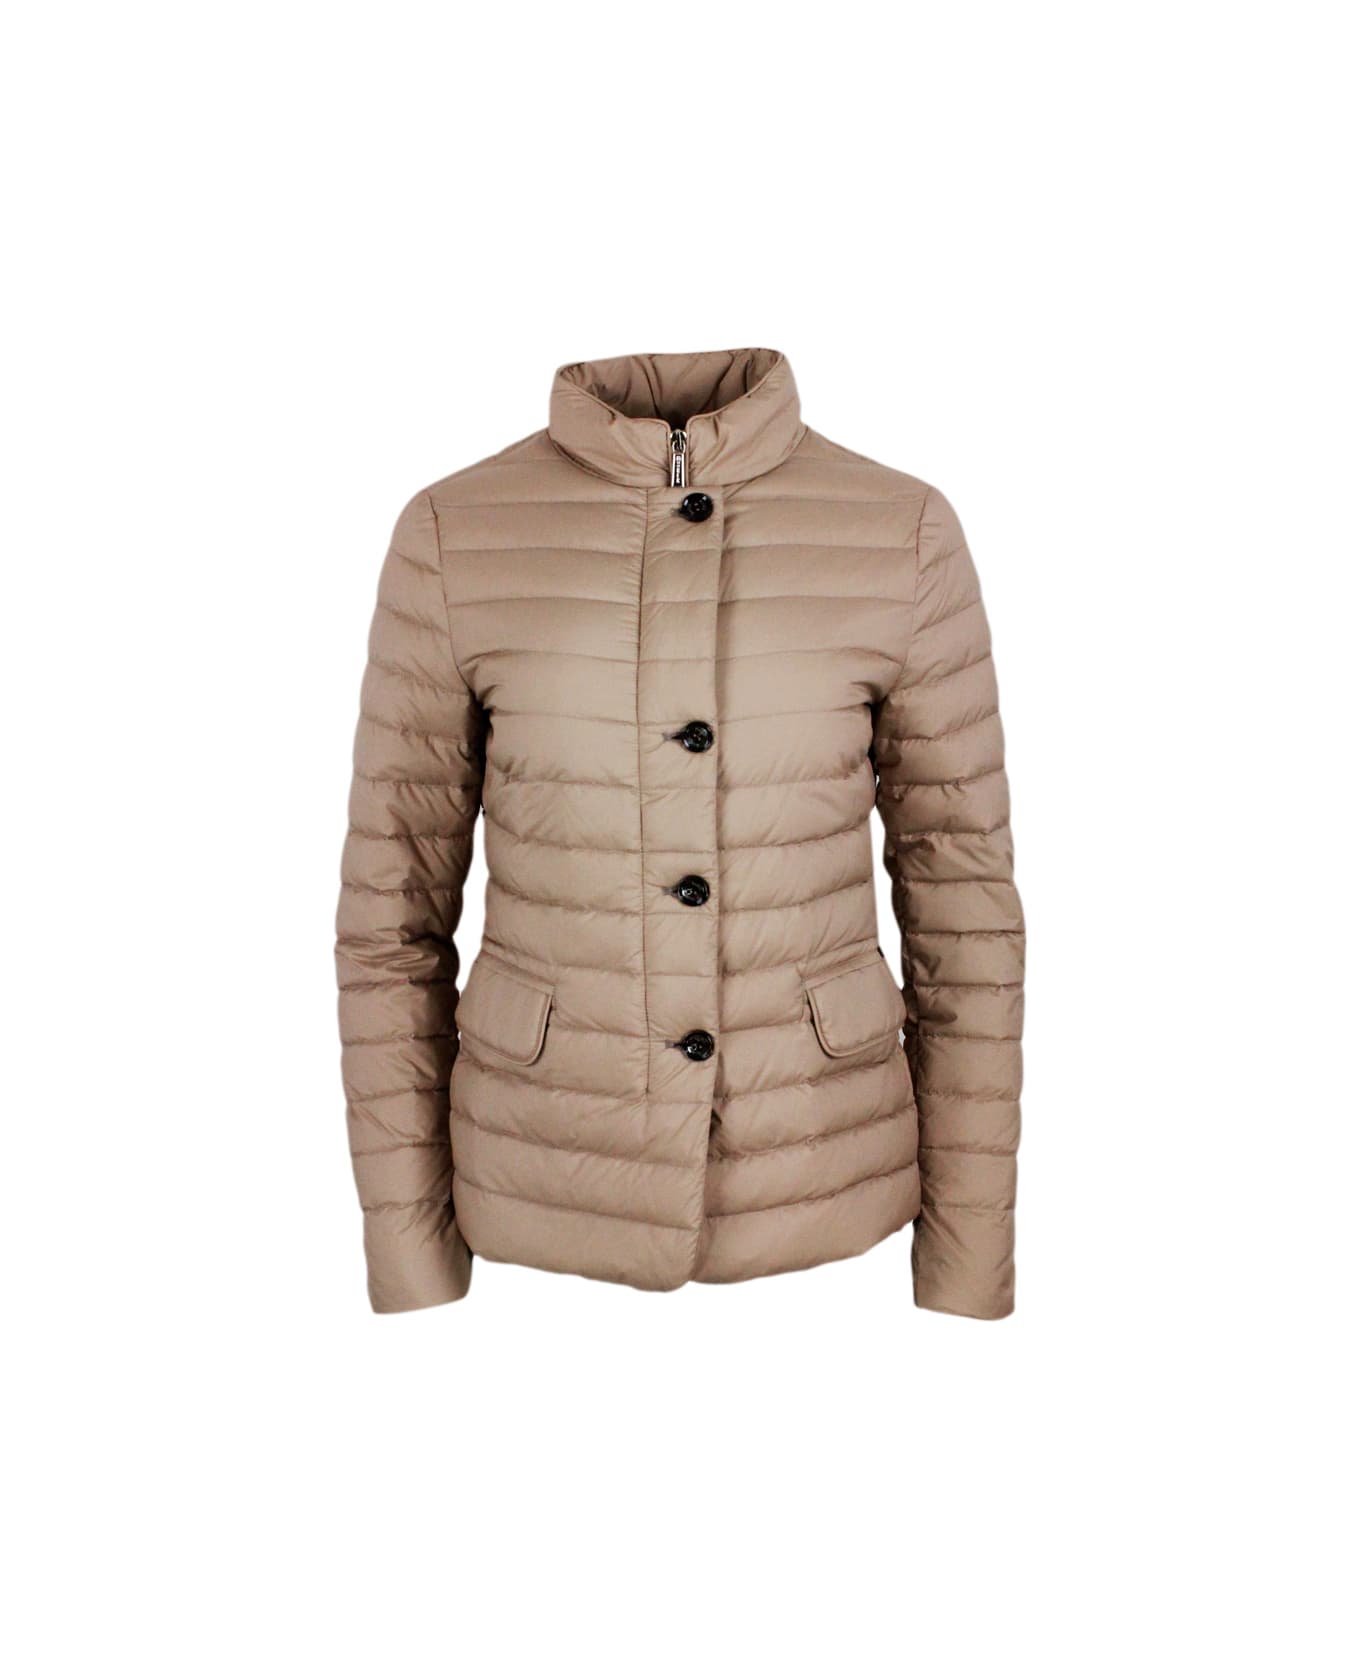 Moorer Light Down Jacket With Zip And Button Closure With Front Flap Pockets - Hazelnut